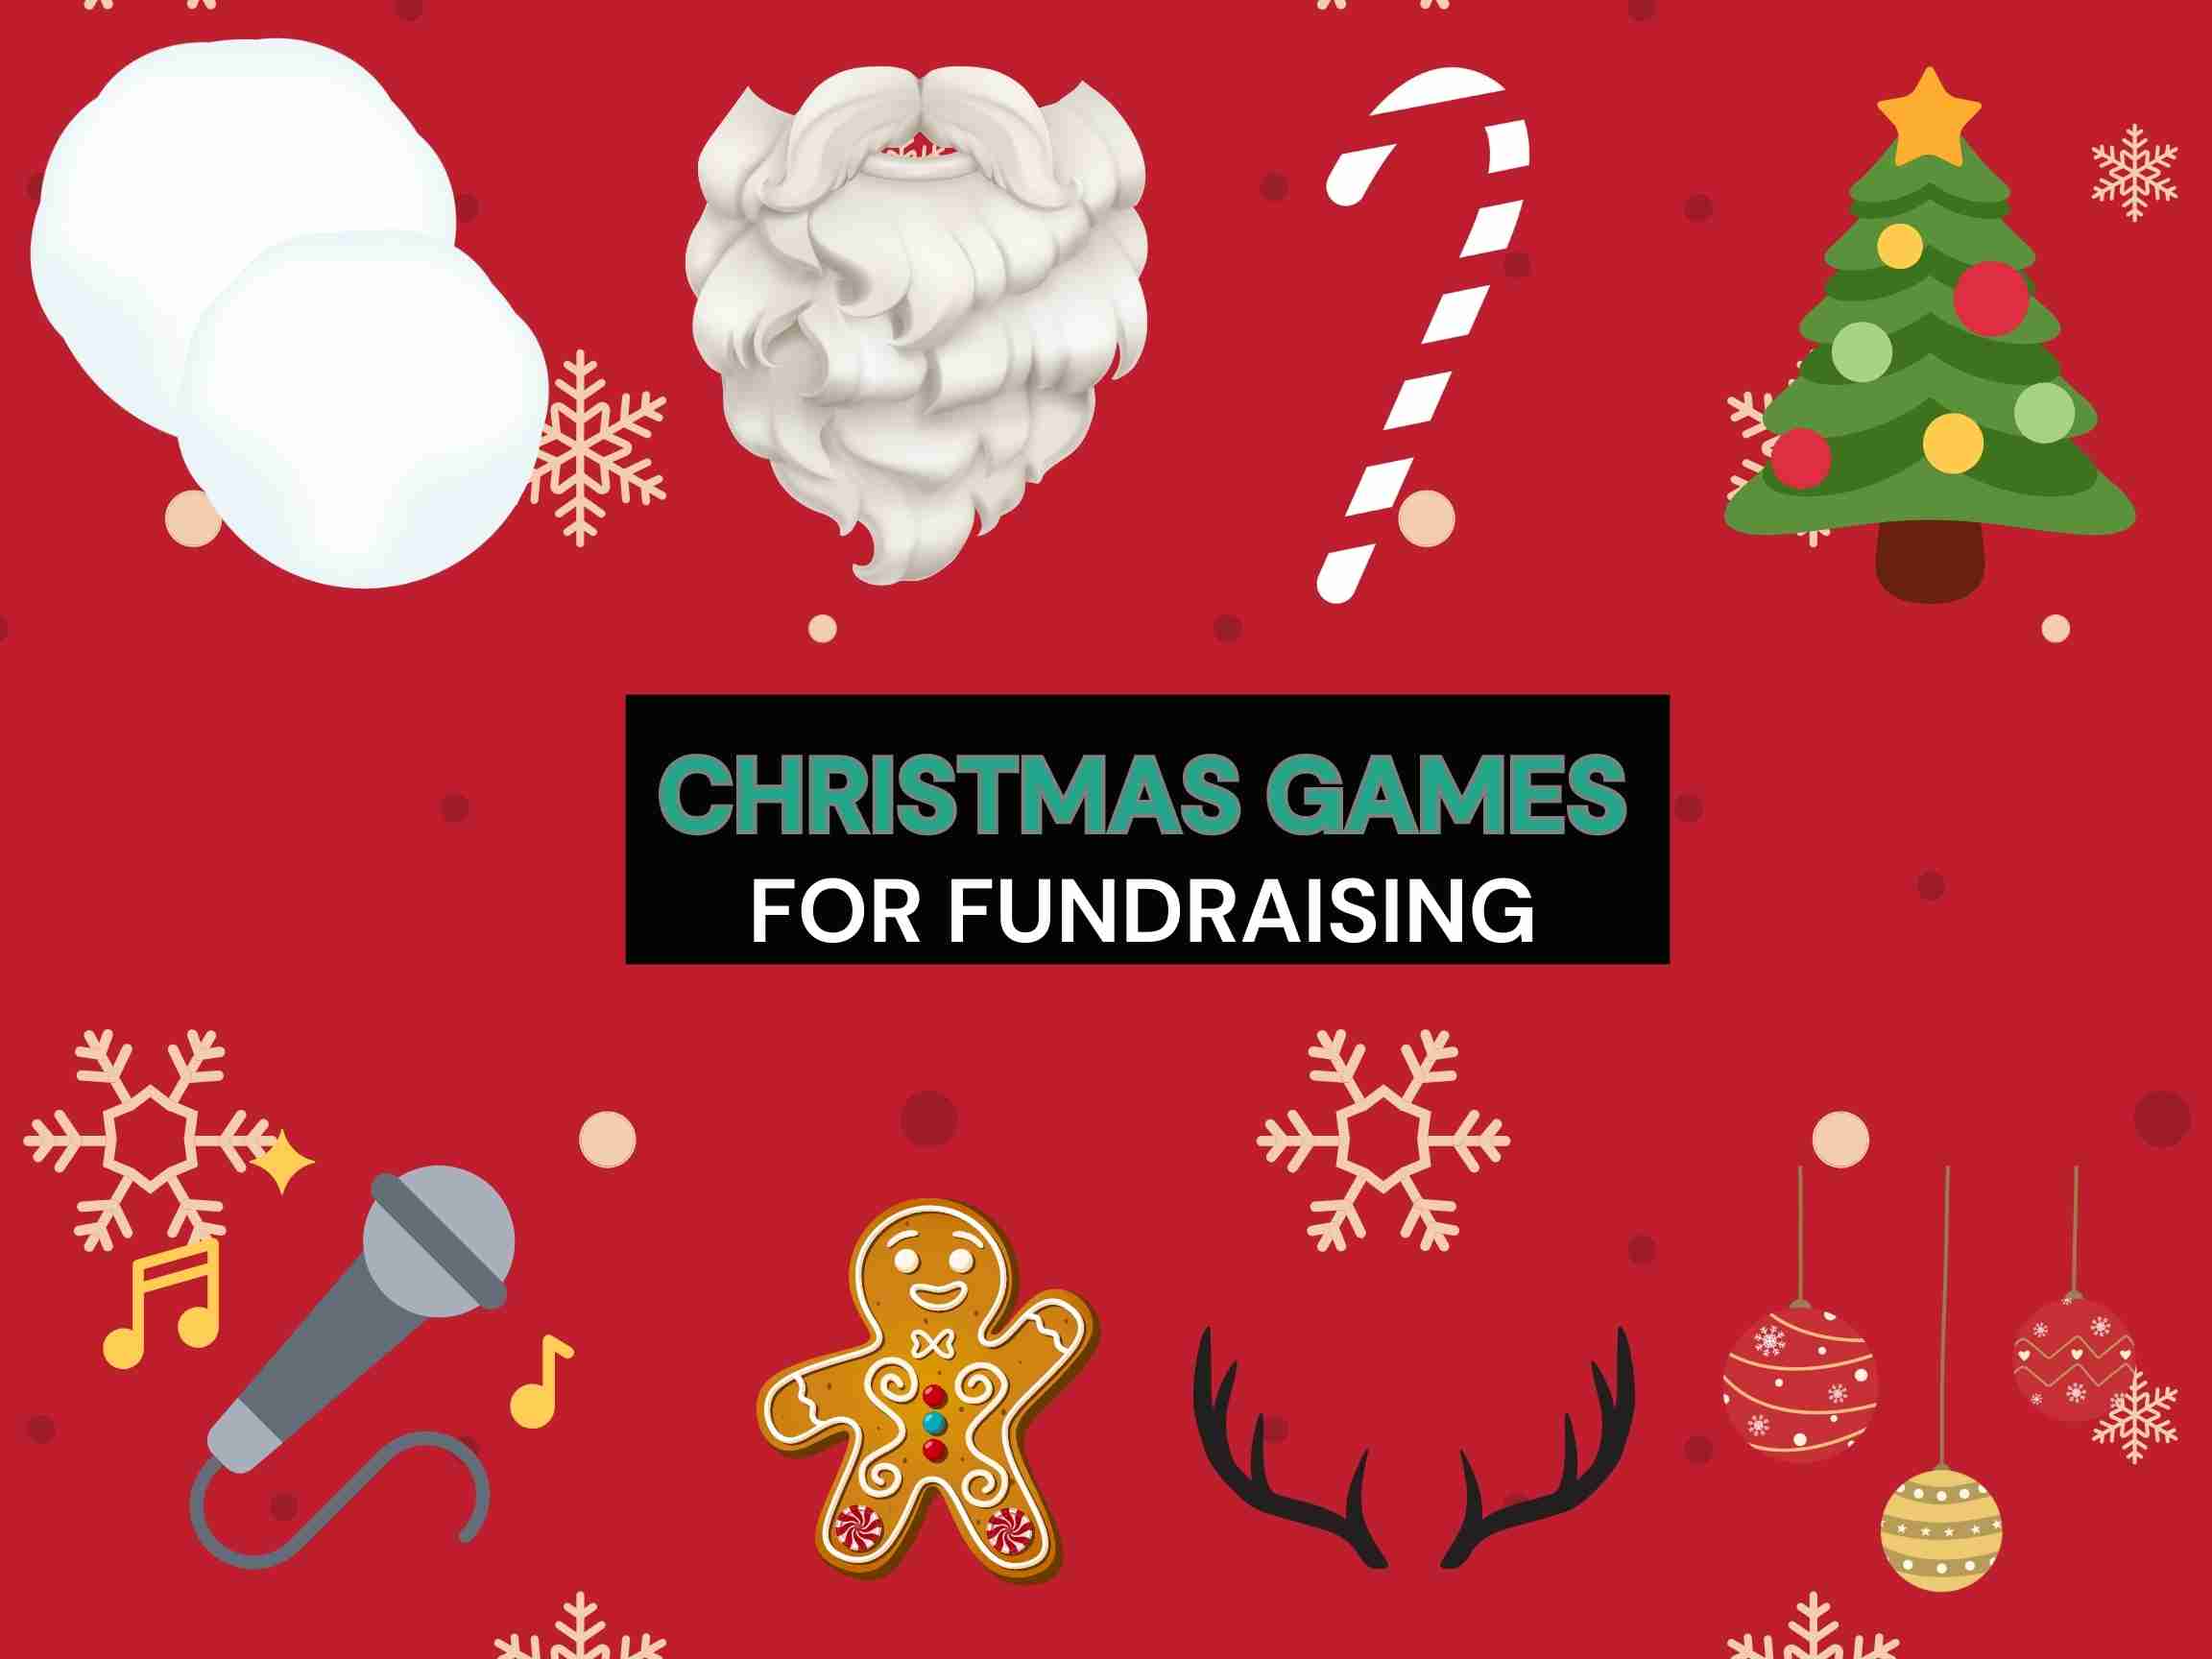 A picture with various Christmas elements suggesting Christmas fundraising games ideas